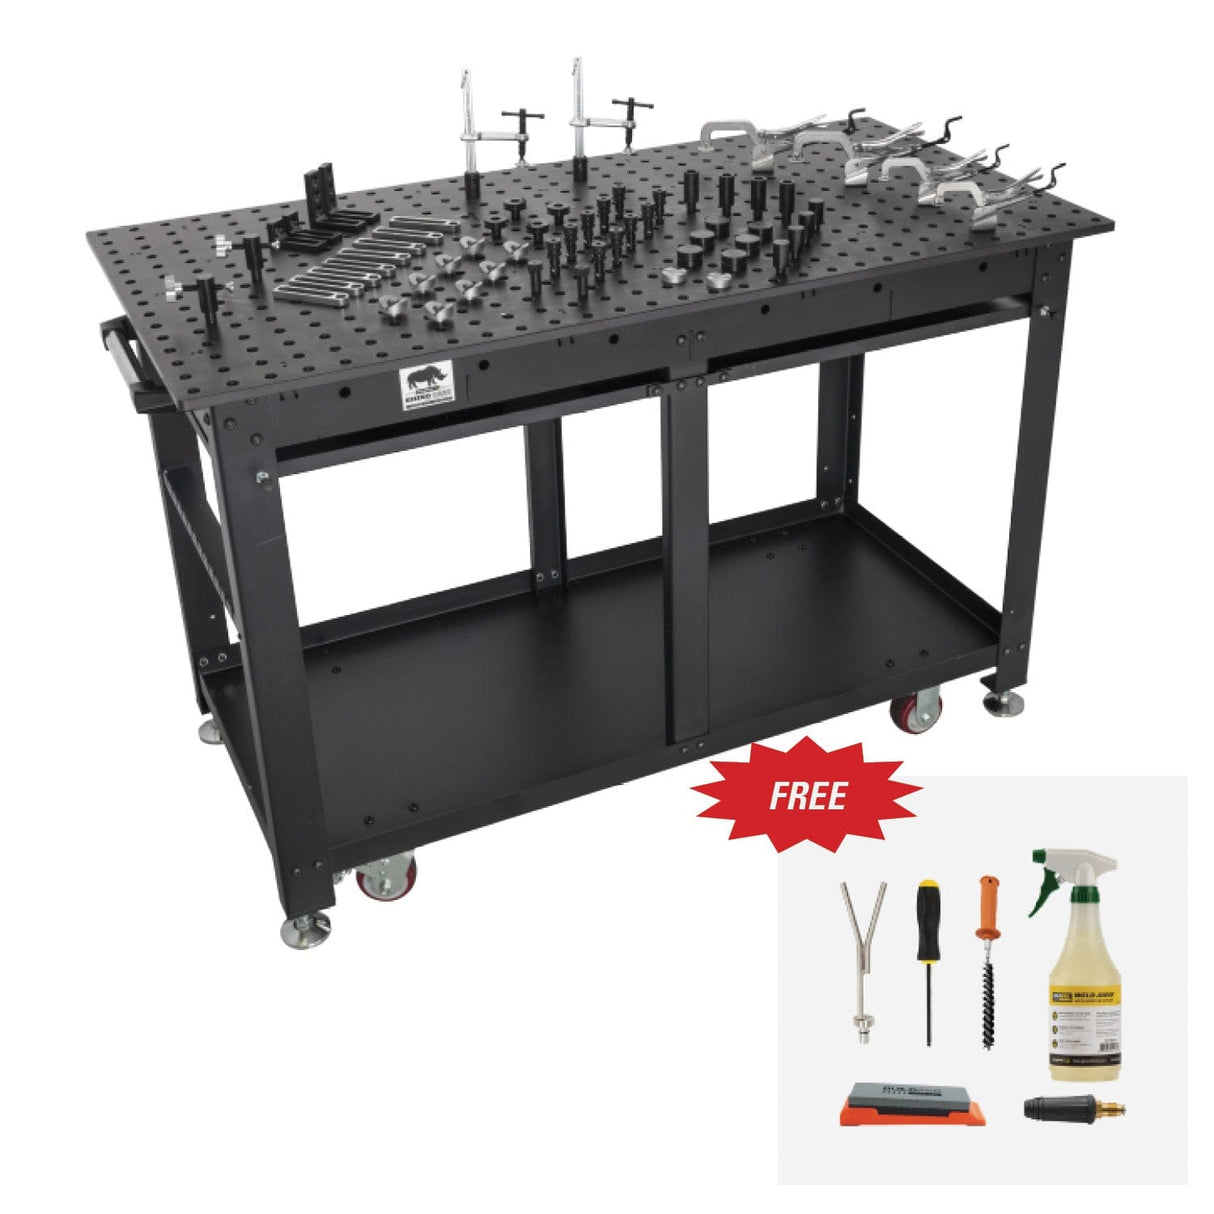 Stronghand 60in. x 30in. Rhino Cart w/ Fixturing Package, Free Maintenance Kit